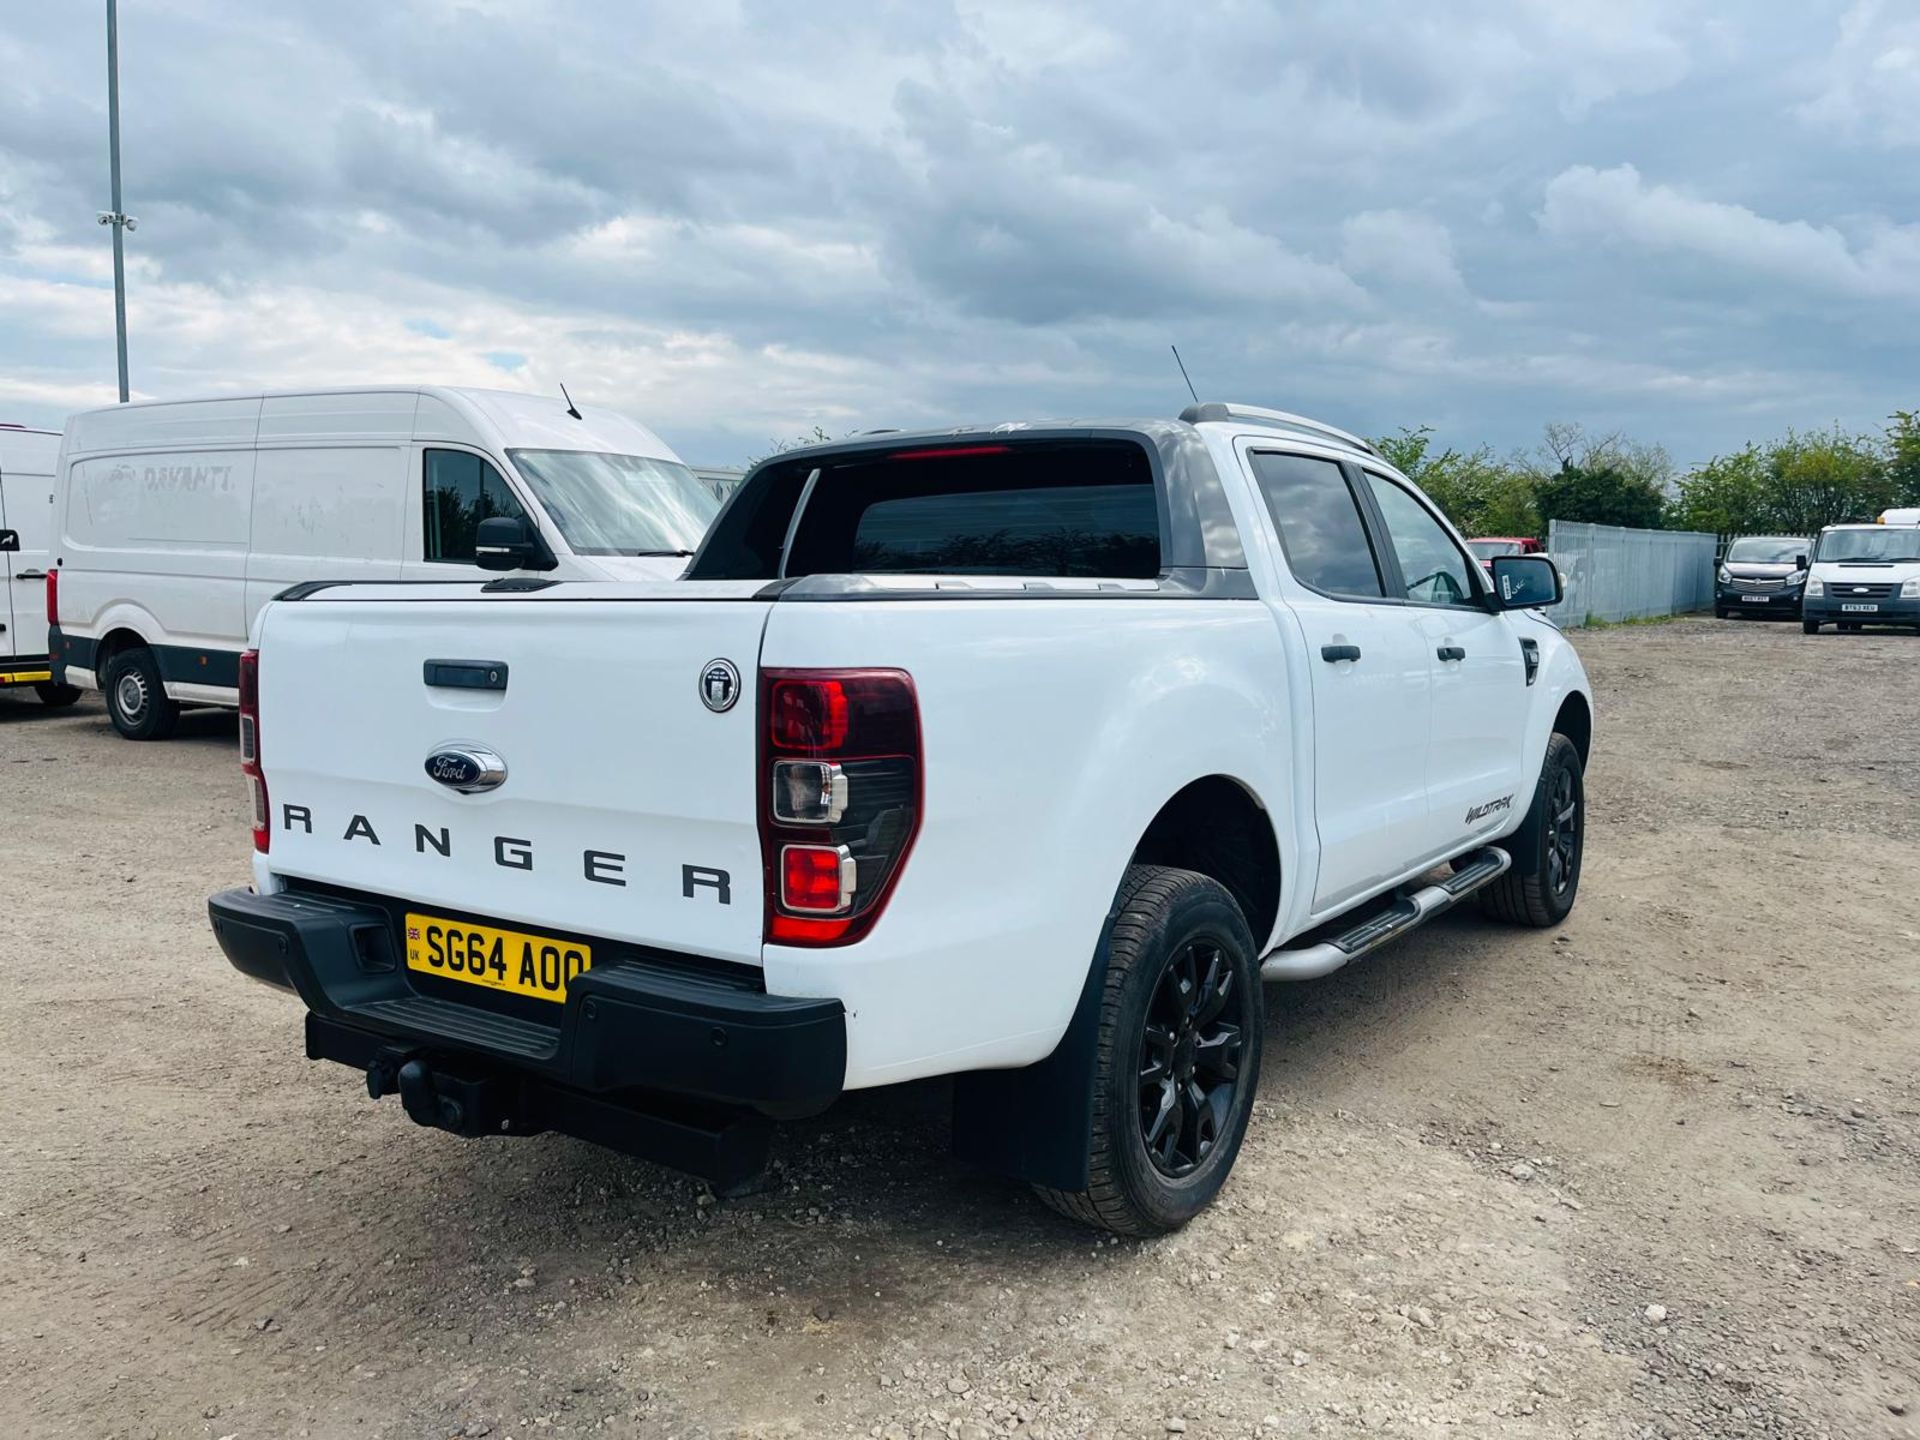 ** ON SALE ** Ford Ranger Wildtrak 3.2 TDCI 200 Automatic 2014 '64 Reg' 4WD - A/C - No Vat - Image 10 of 33